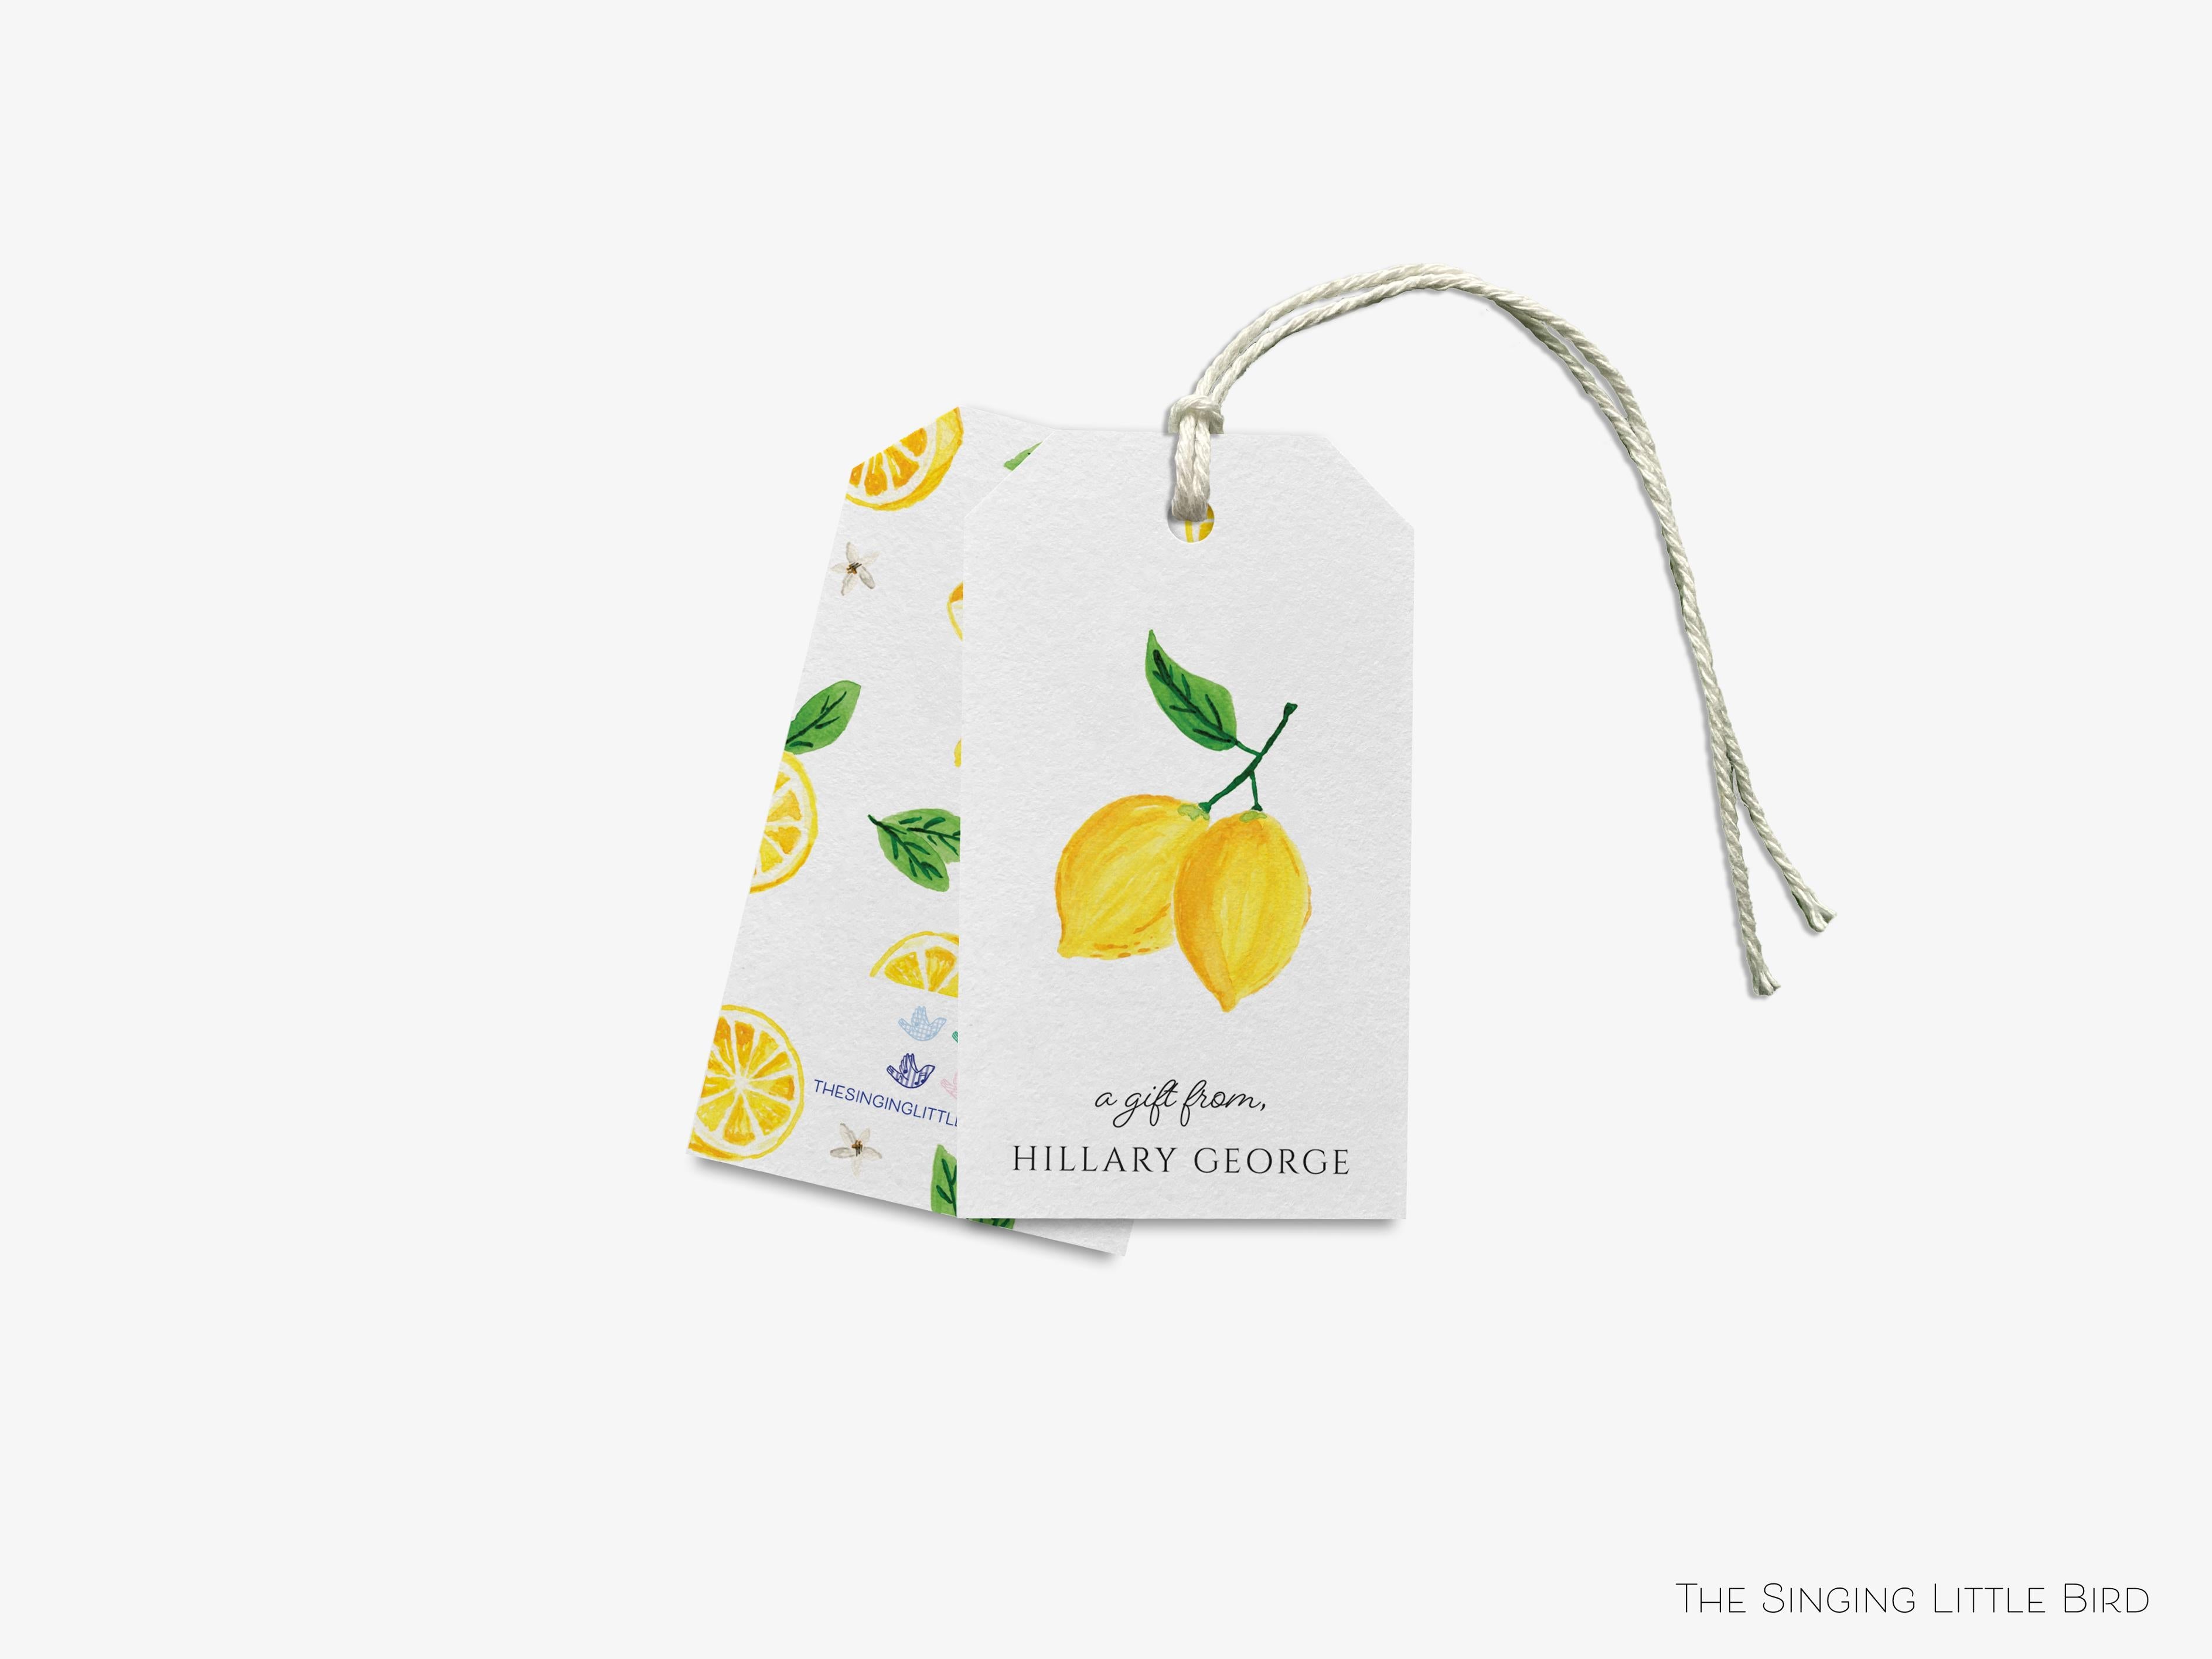 Personalized Lemon Gift Tags-These gift tags come in sets, hole-punched with white twine and feature our hand-painted watercolor lemon, printed in the USA on 120lb textured stock. They make great tags for gifting or gifts for the citrus lover in your life.-The Singing Little Bird